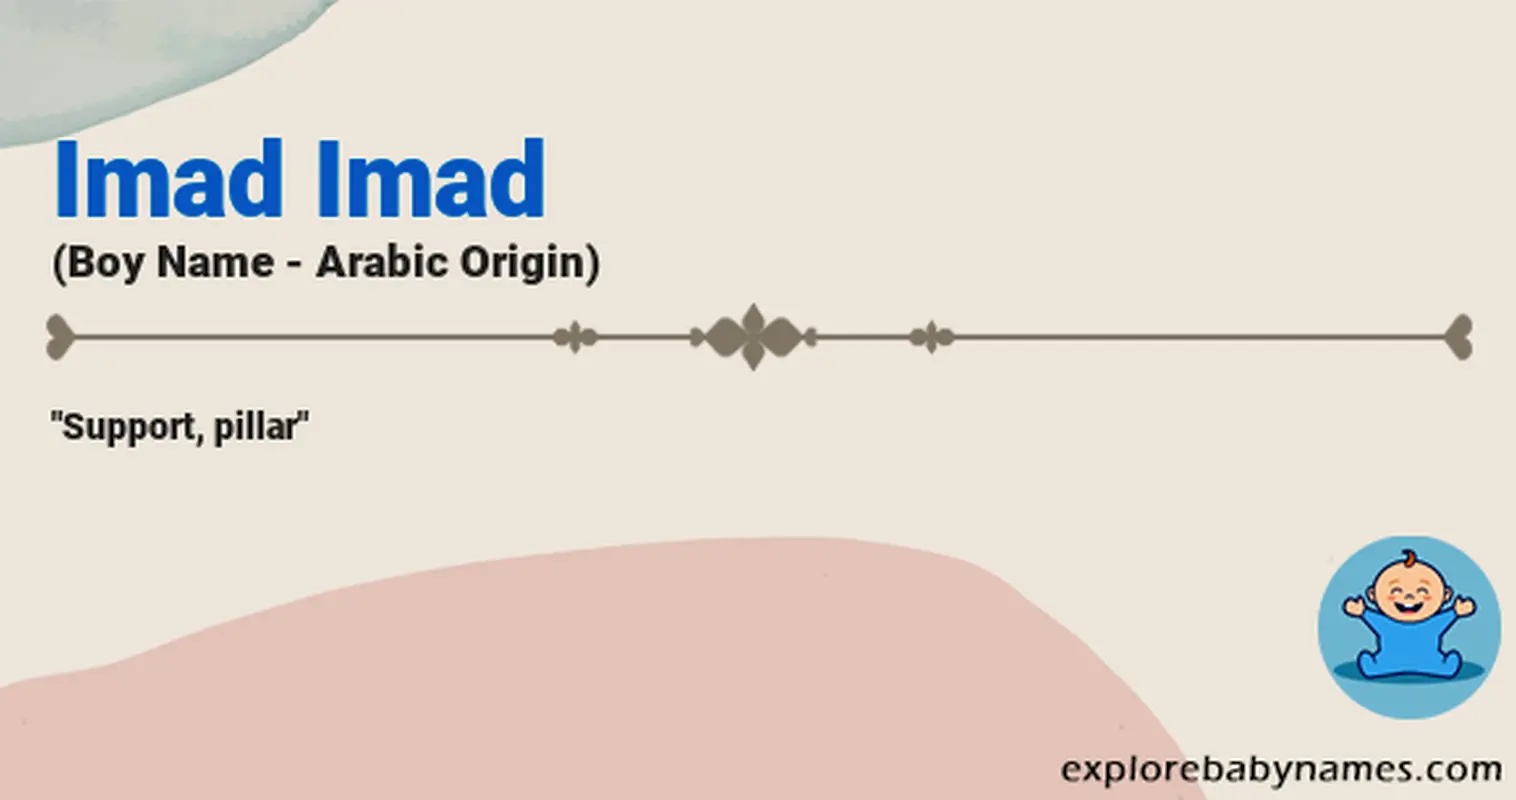 Meaning of Imad Imad